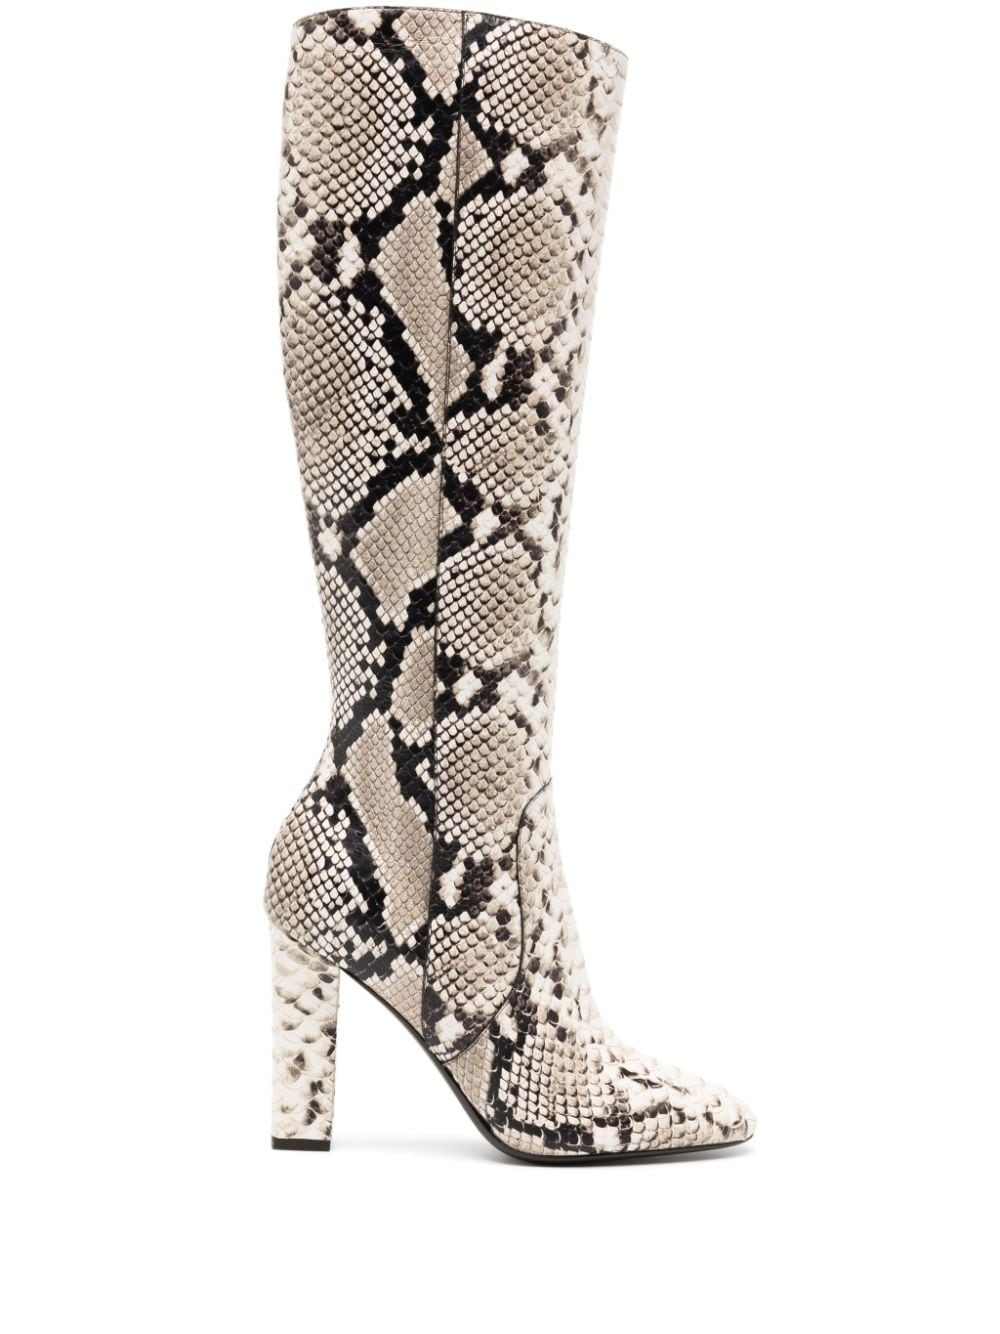 Michael Kors Collection Carly Runway 100mm leather boots - White von Michael Kors Collection